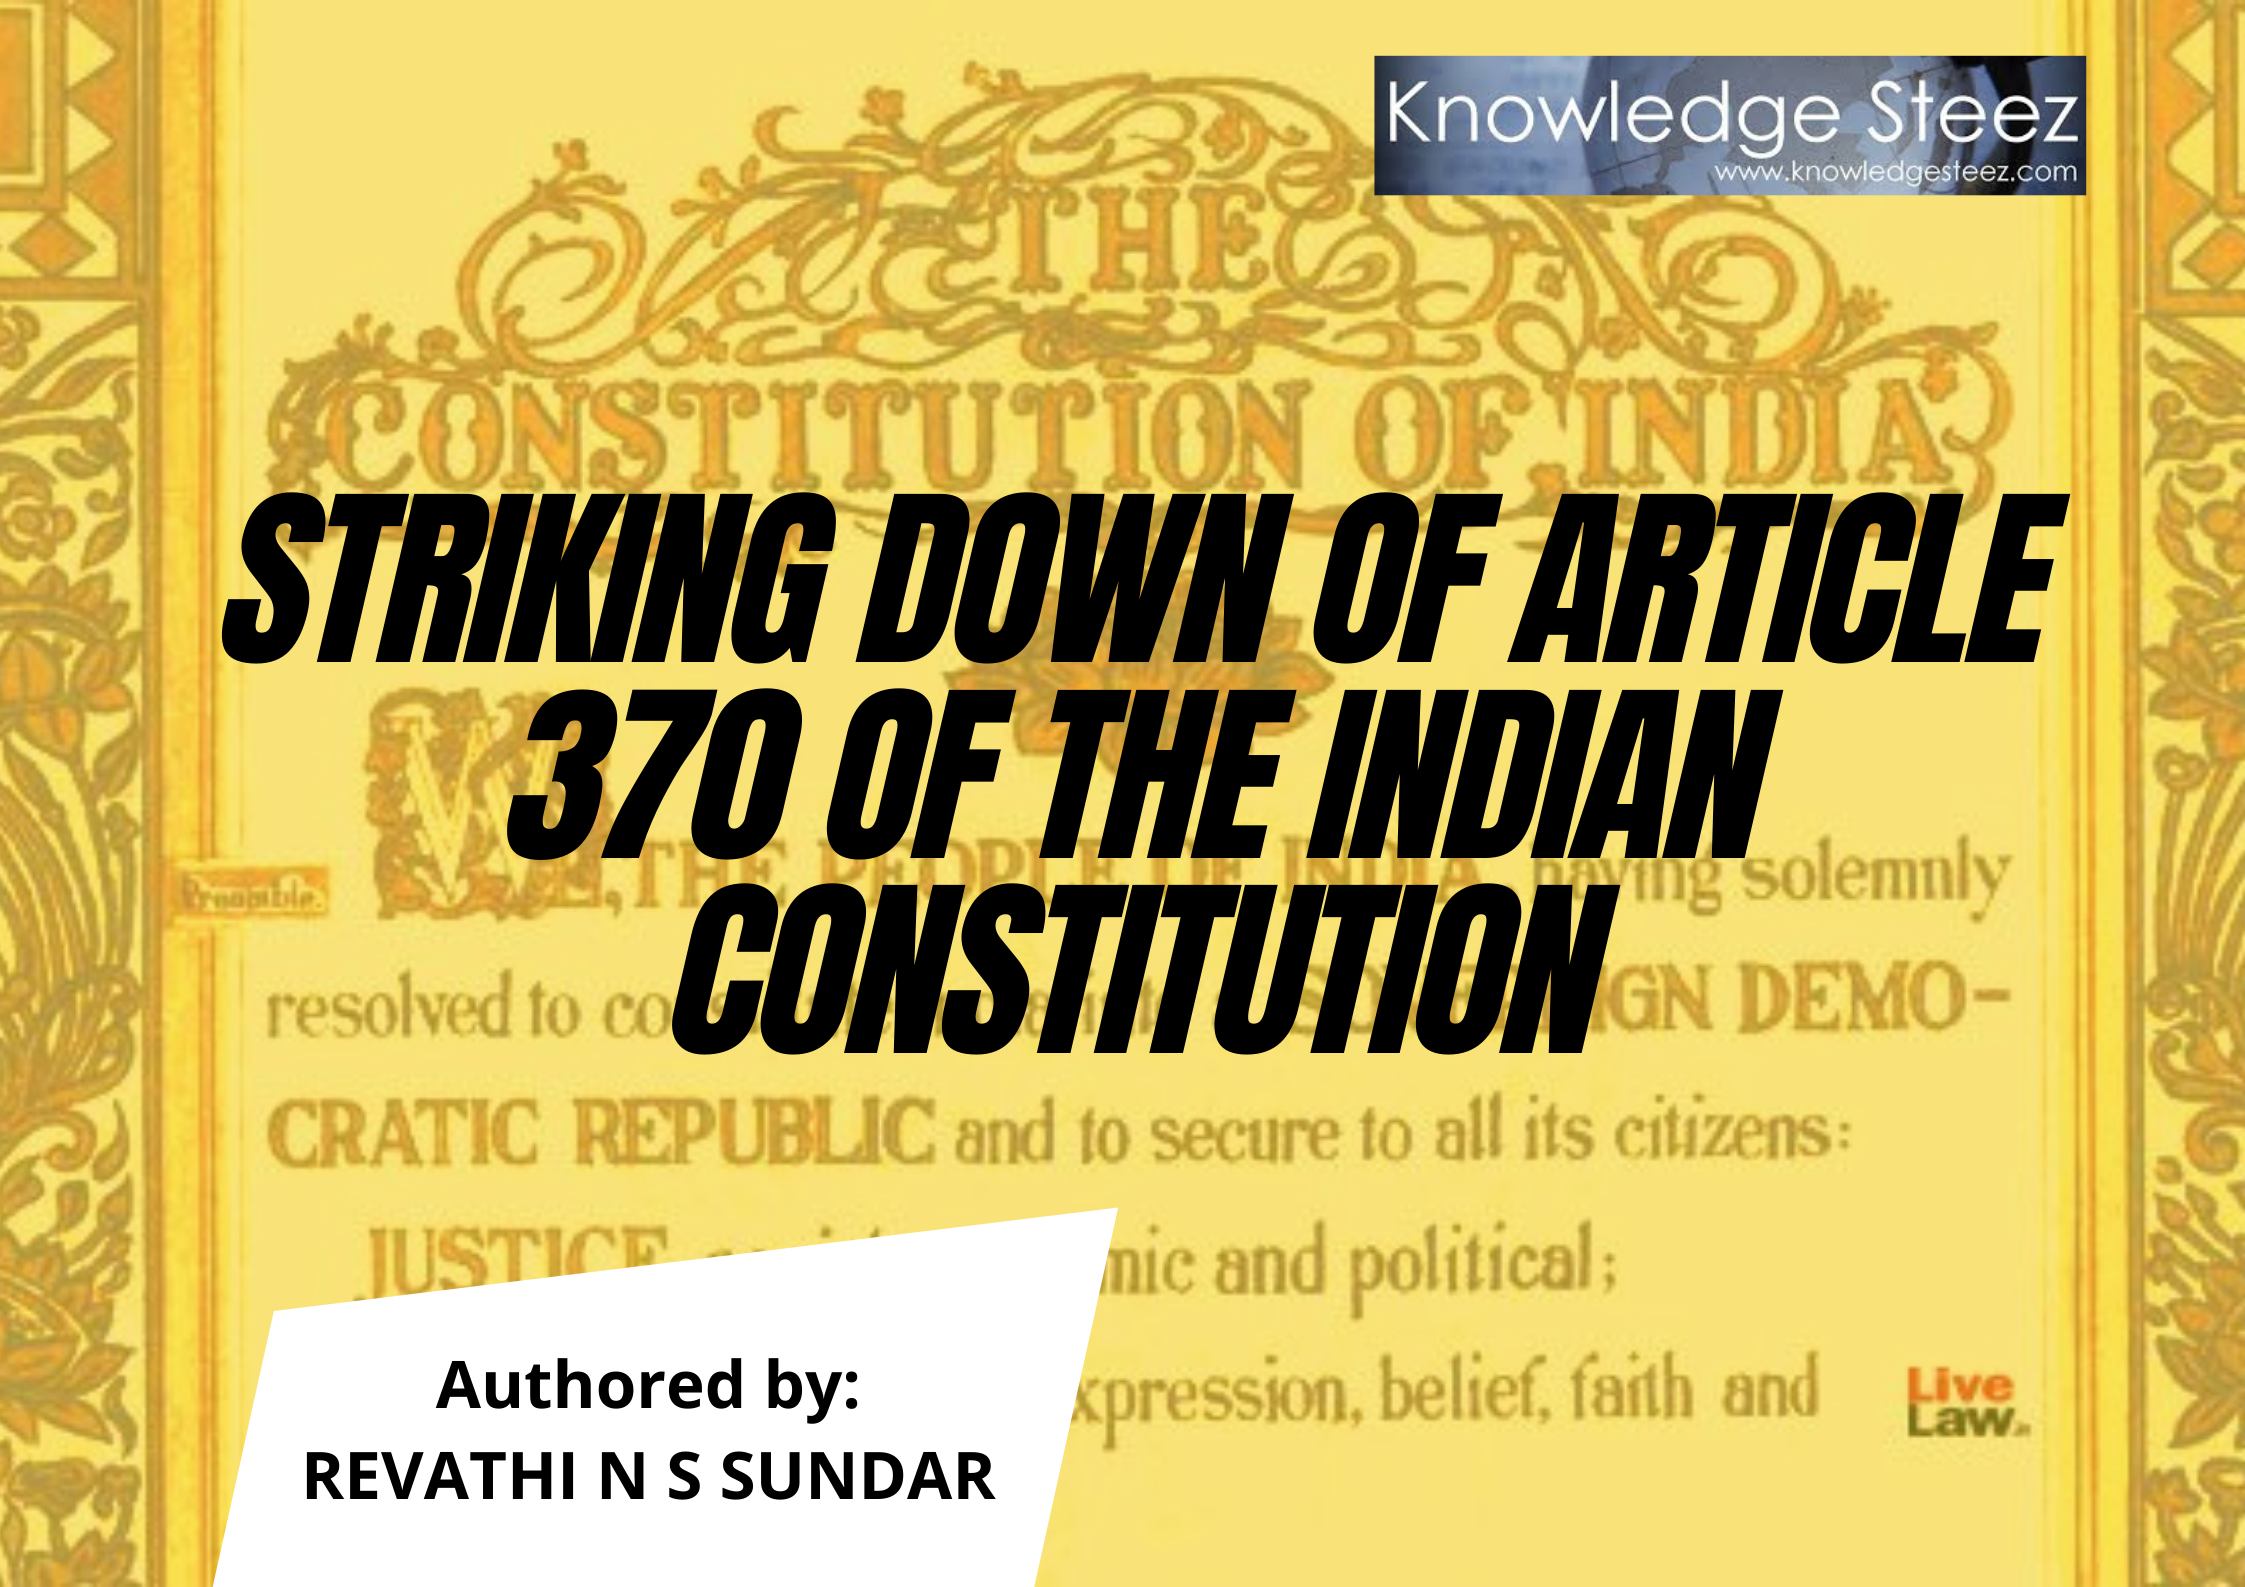 STRIKING DOWN OF ARTICLE 370 OF THE INDIAN CONSTITUTION